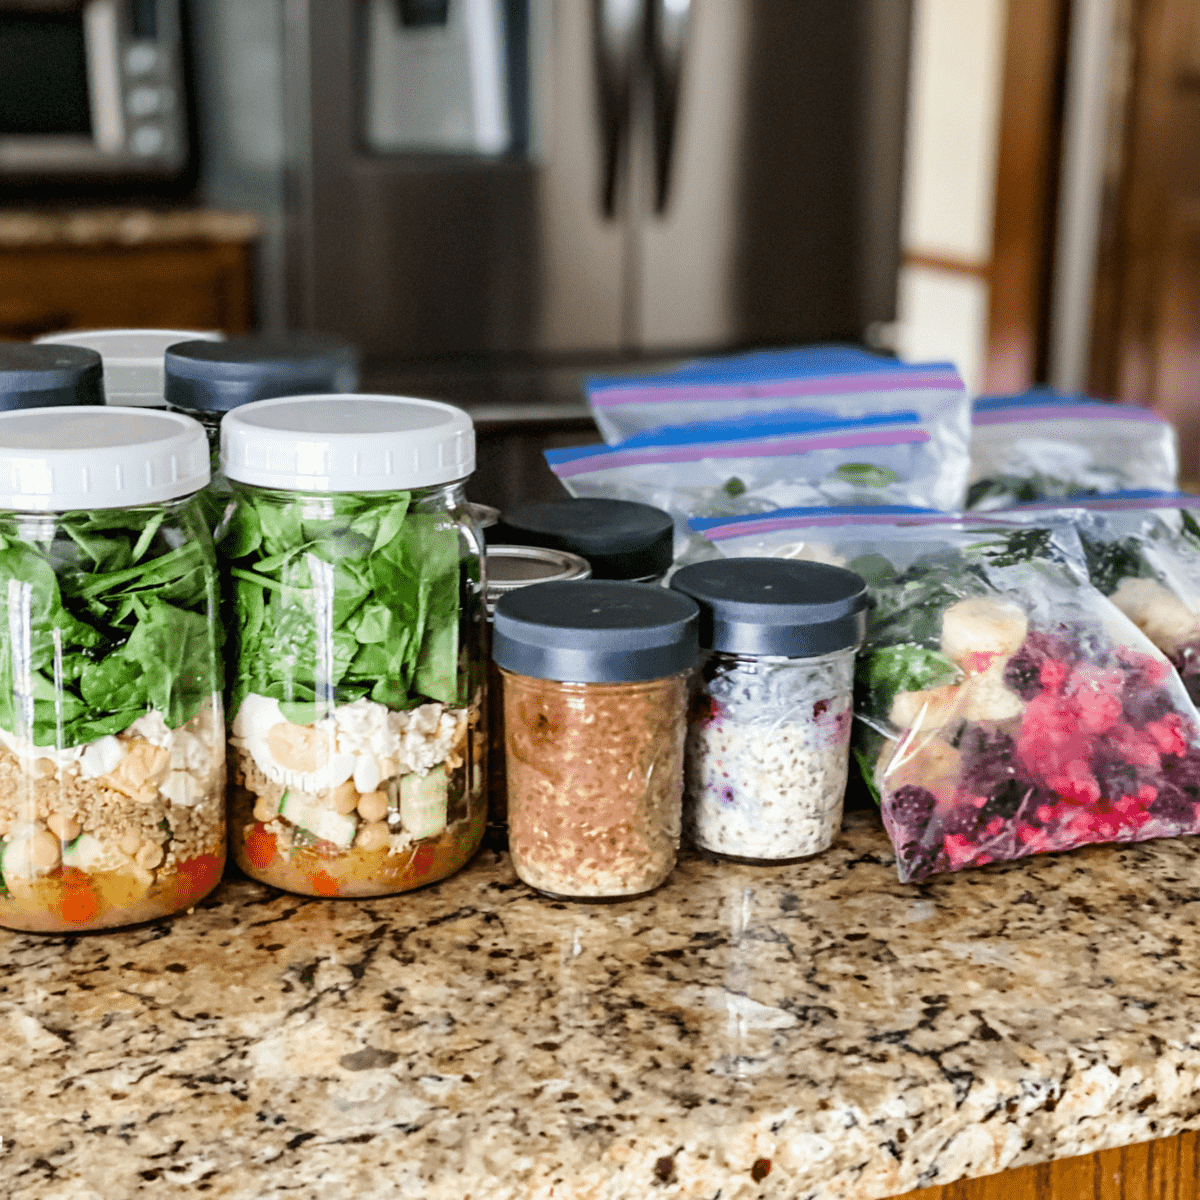 meal prep for weight loss. meal prep meals on a kitchen counter.